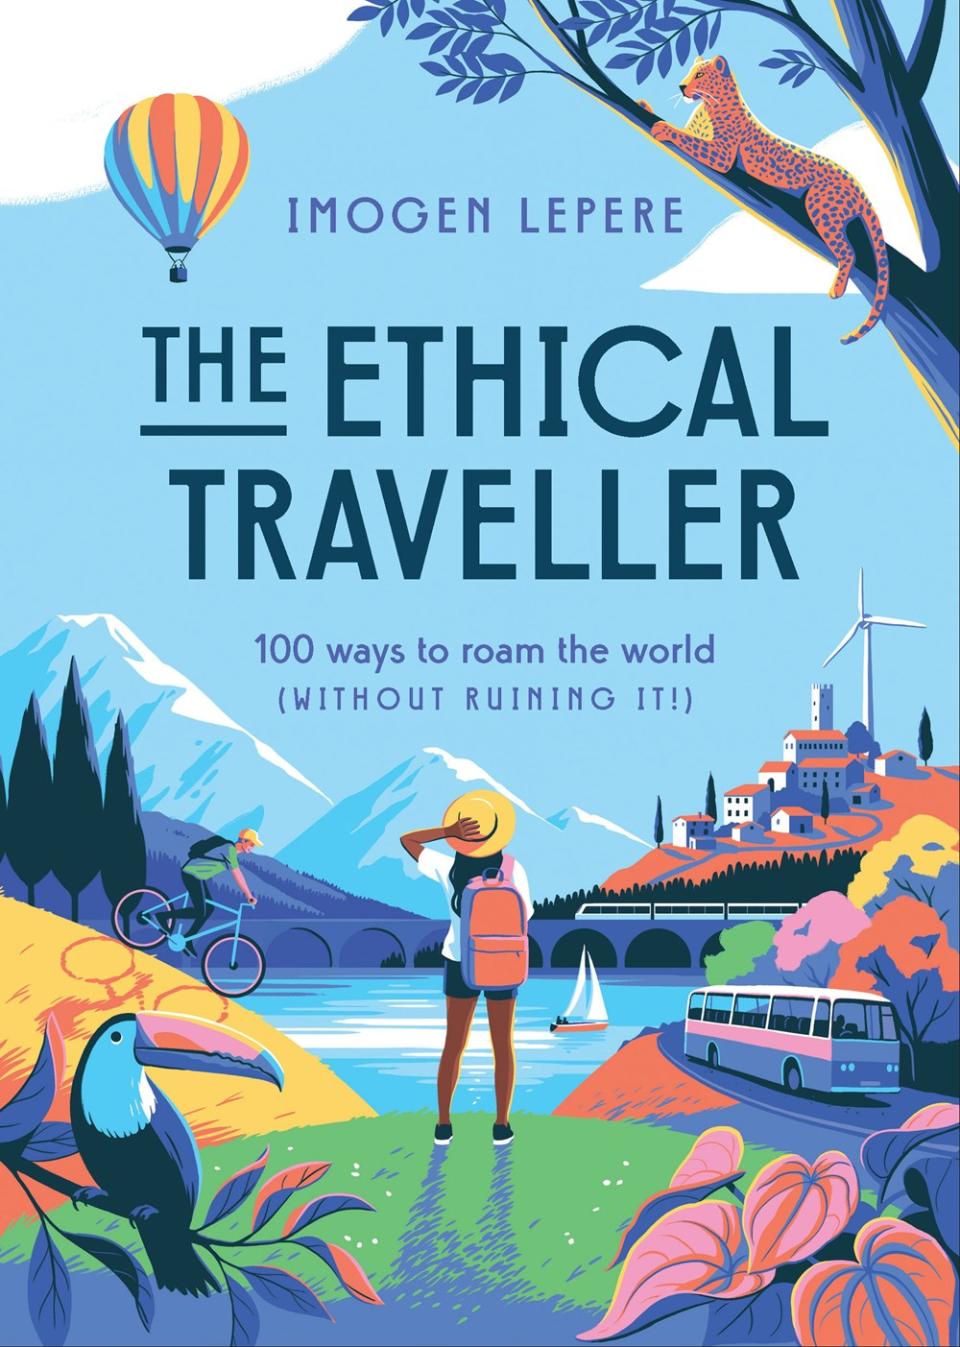 The Ethical Traveller - New Years Resolution Books